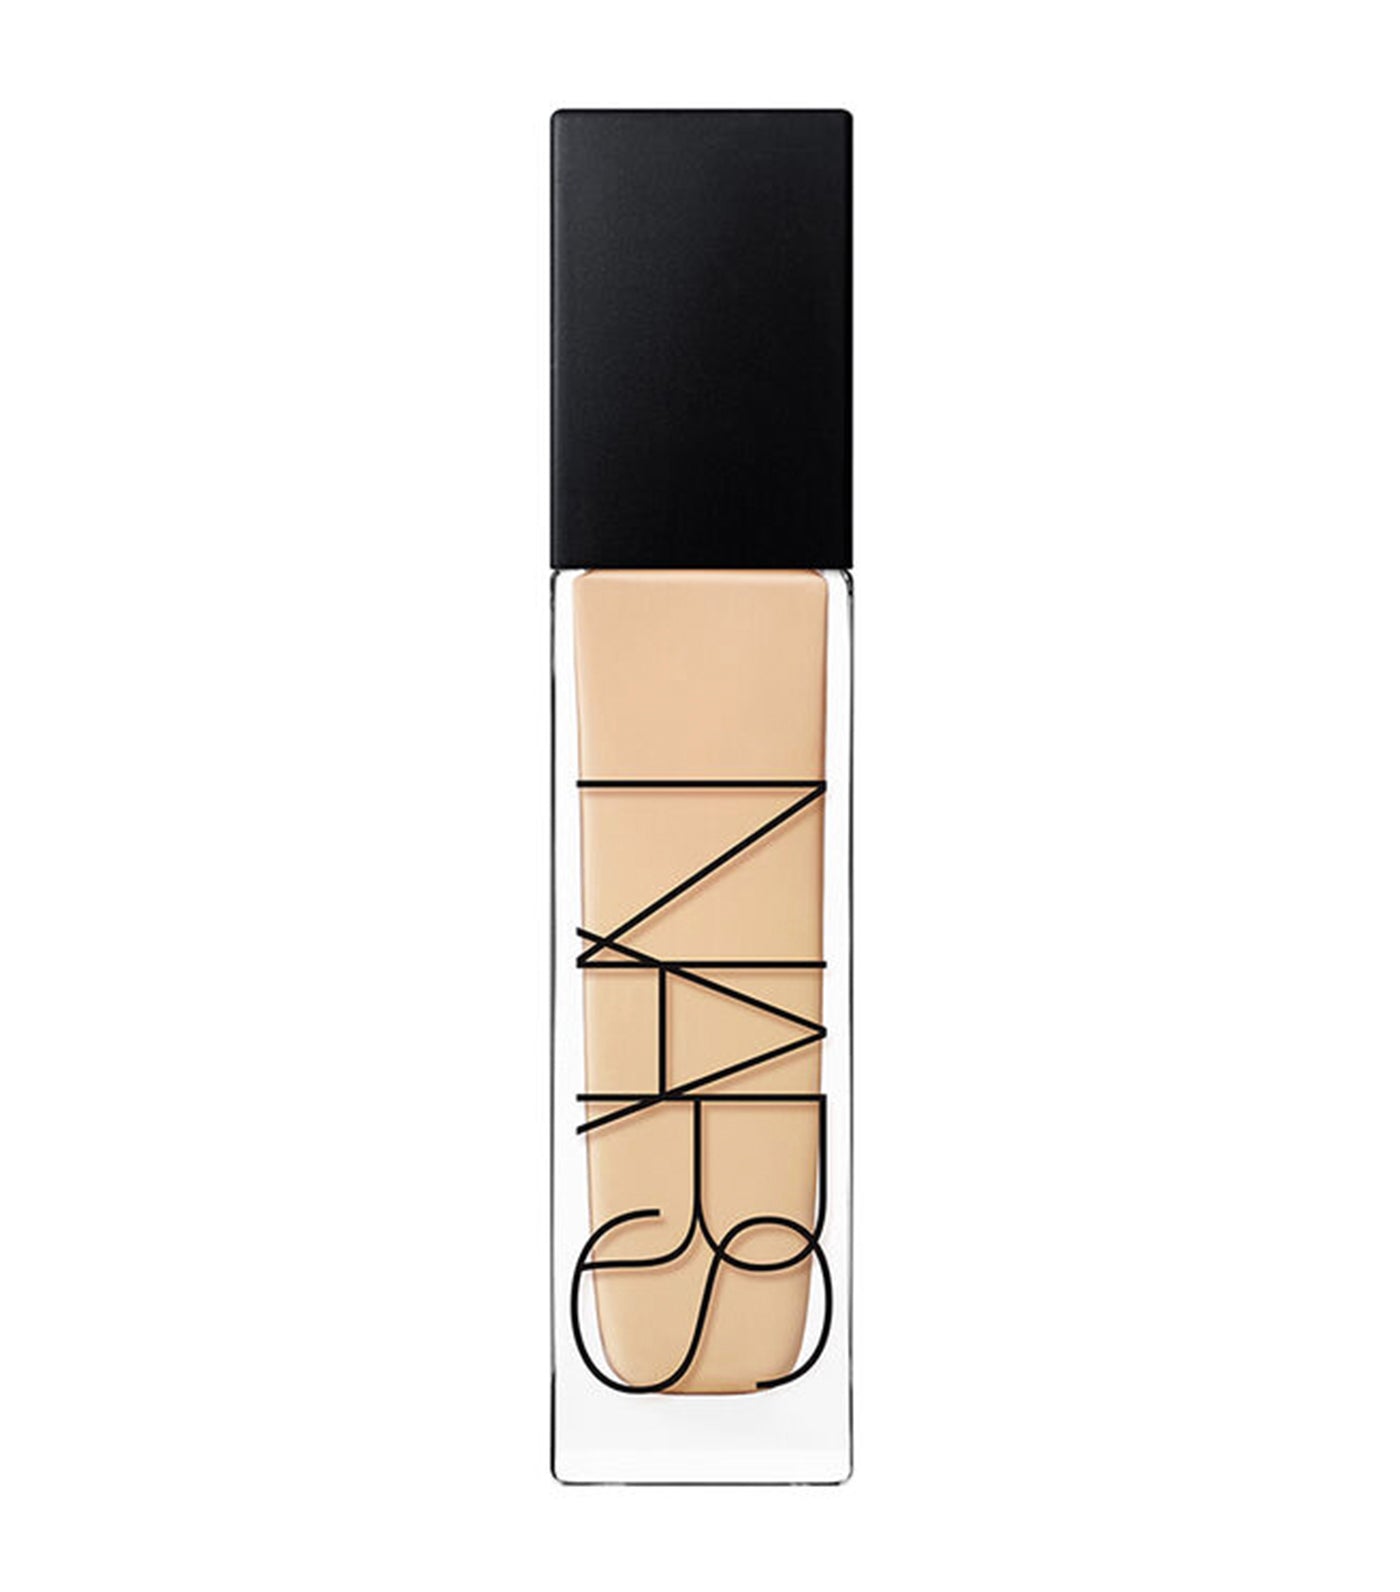 nars deauville natural radiant longwear foundation